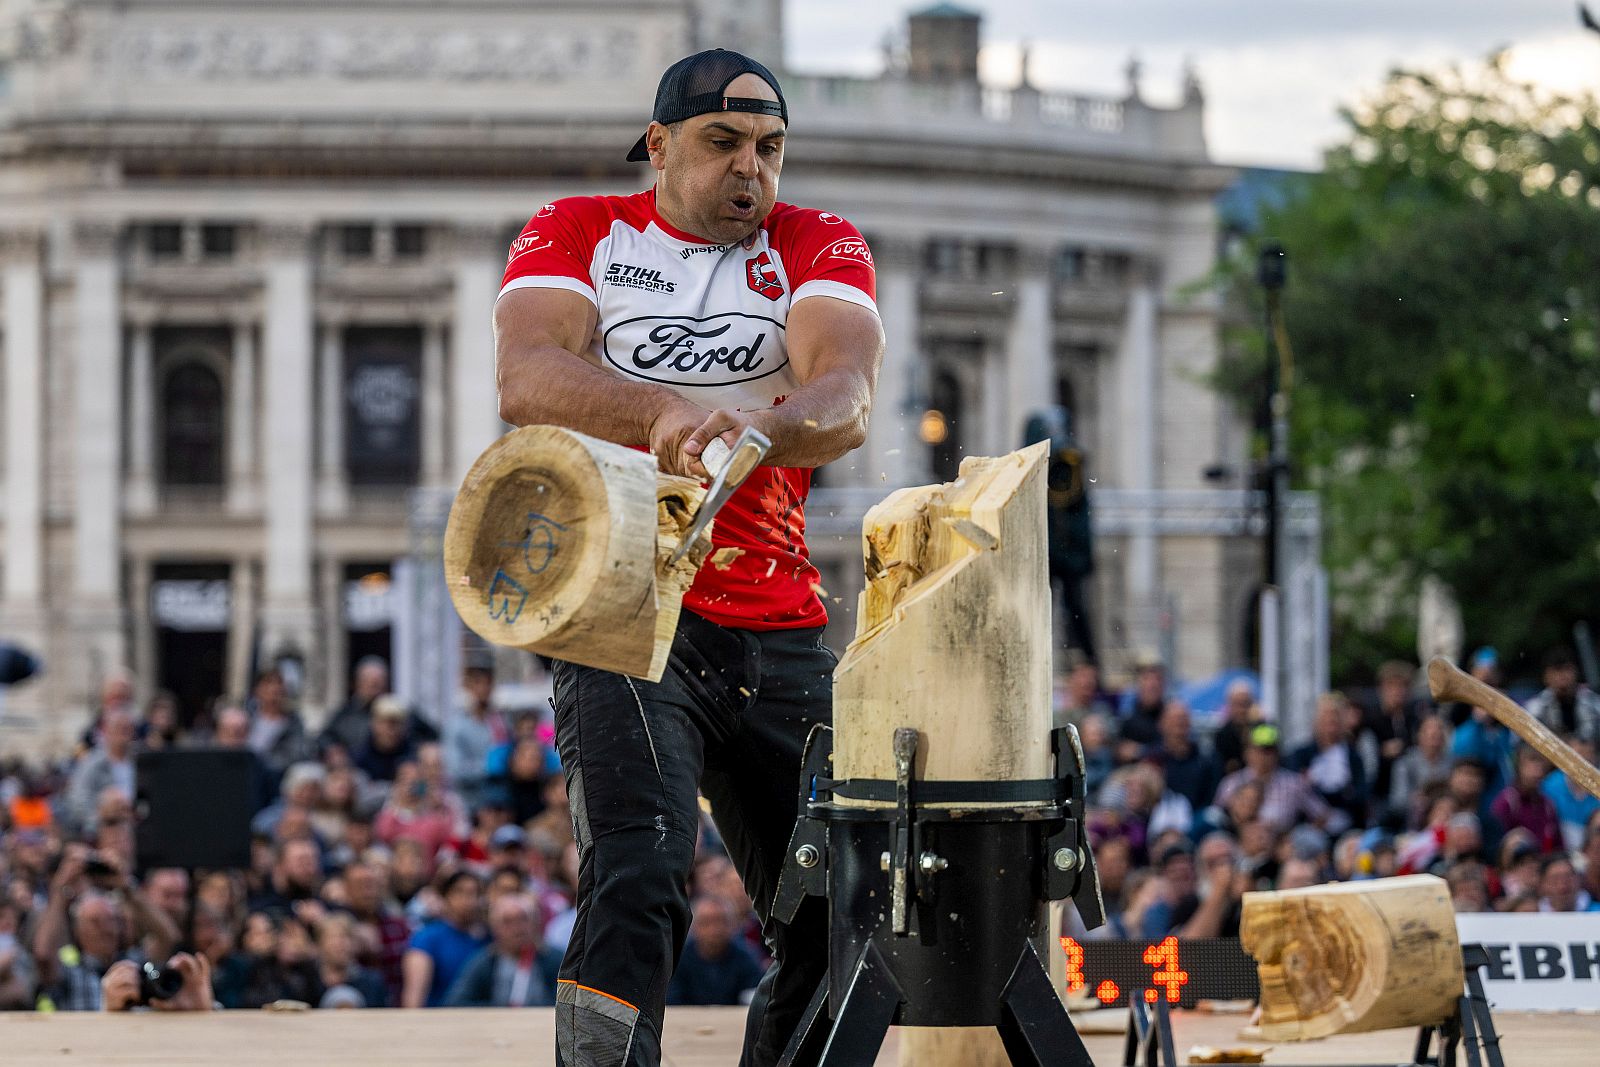 Michal Dubicki of Poland performs during the STIHL TIMBERSPORTS® World Trophy 2022 in Vienna, Austria on May 28, 2022.